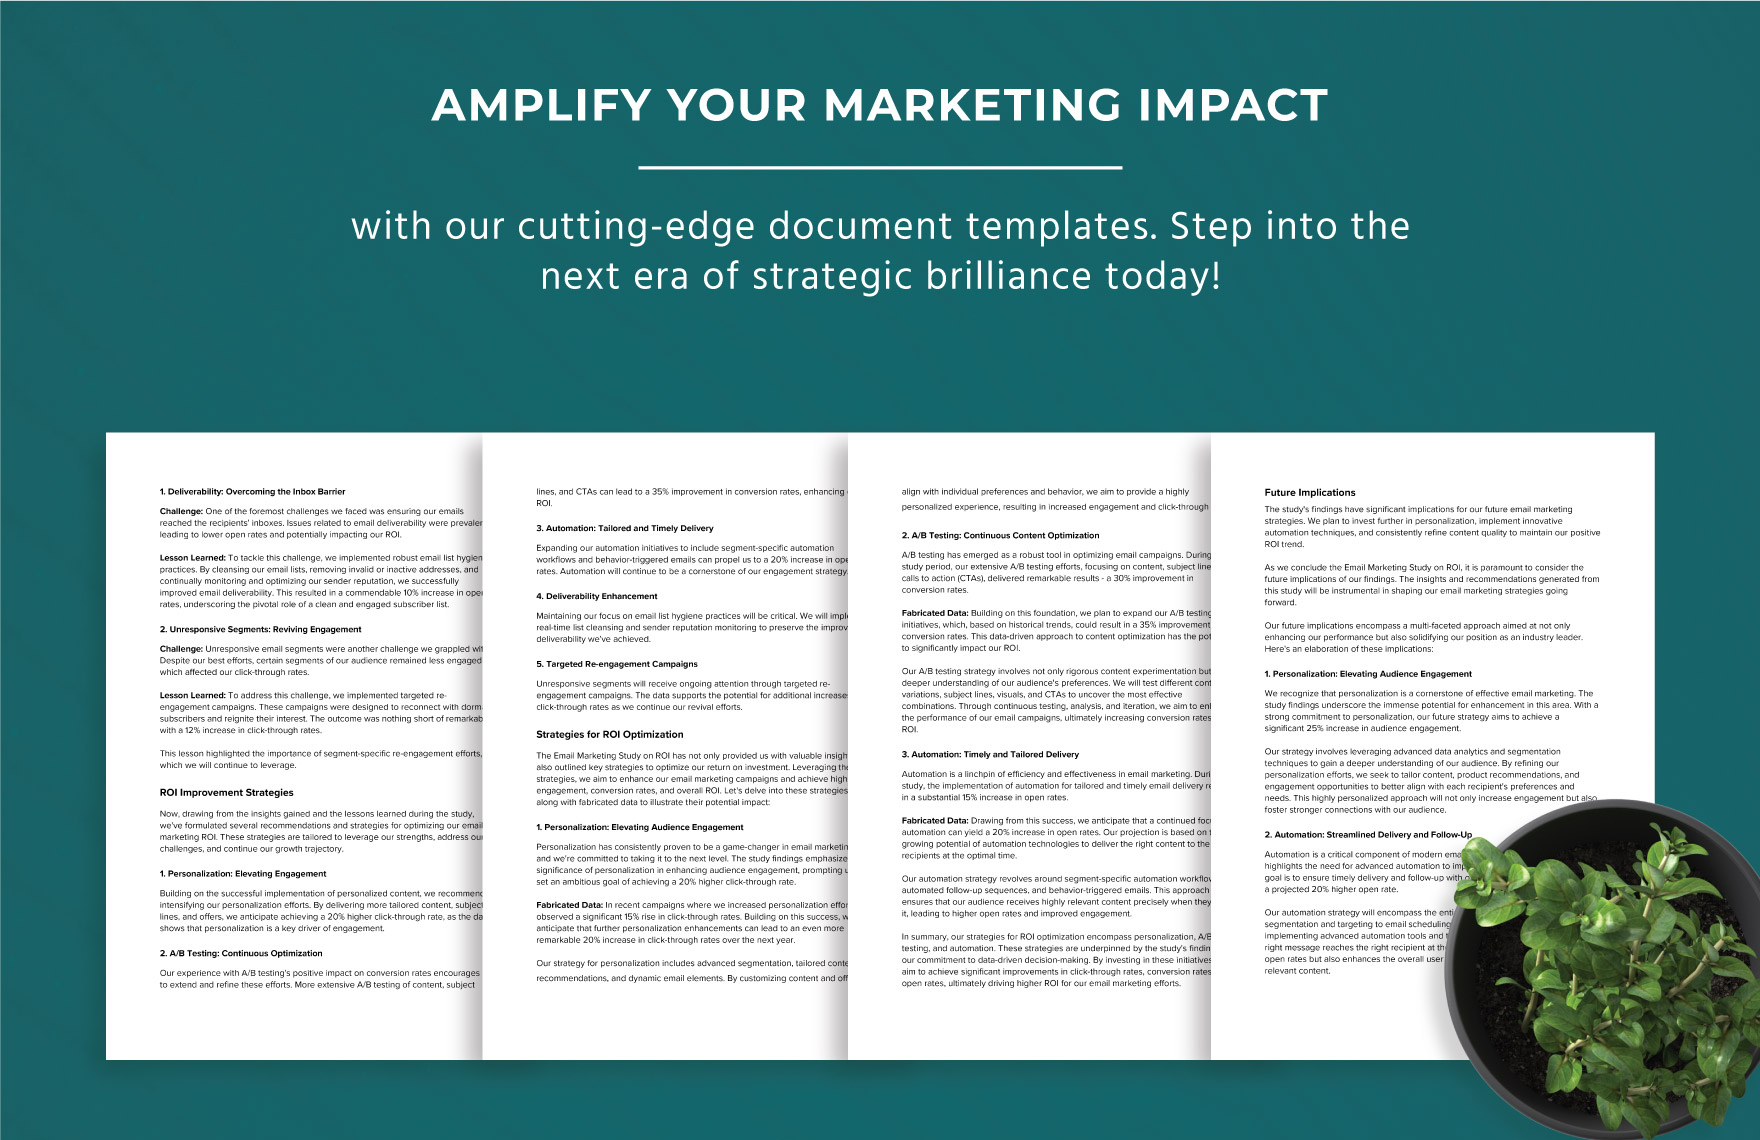 Email Marketing Study on the ROI Template